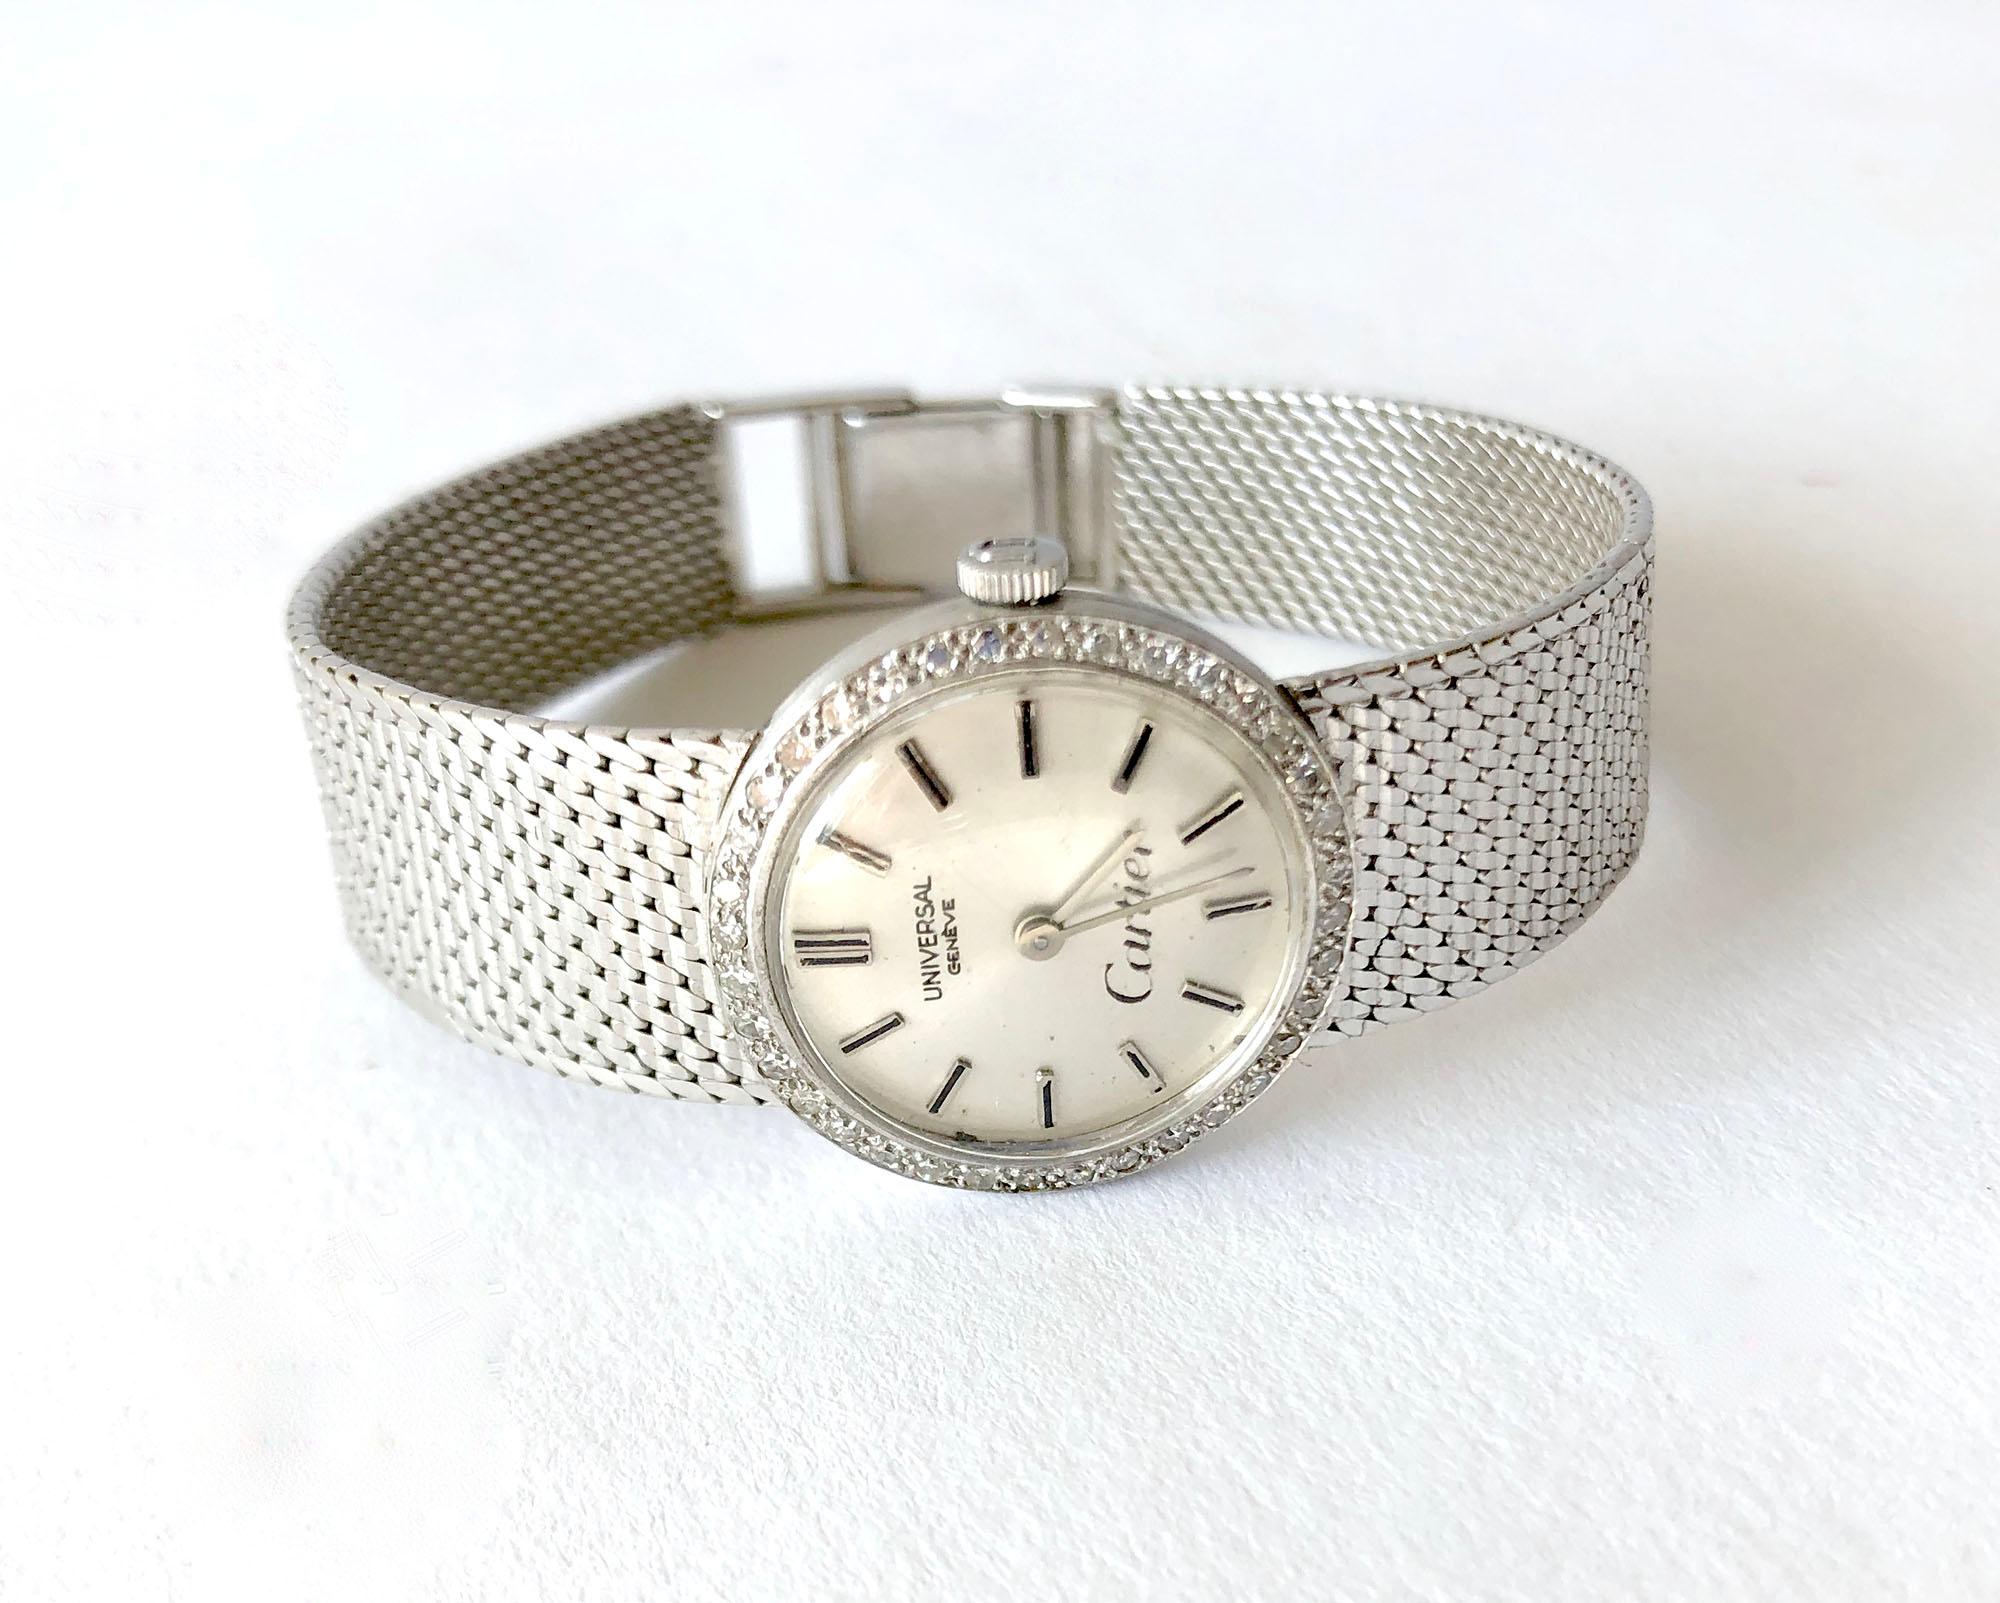 Vintage 1950s 18K white gold mesh ladies Universal Genéve wrist watch with diamond surrounded dial by Cartier.  White gold mesh bracelet is made for a small wrist and measures 6 1/8